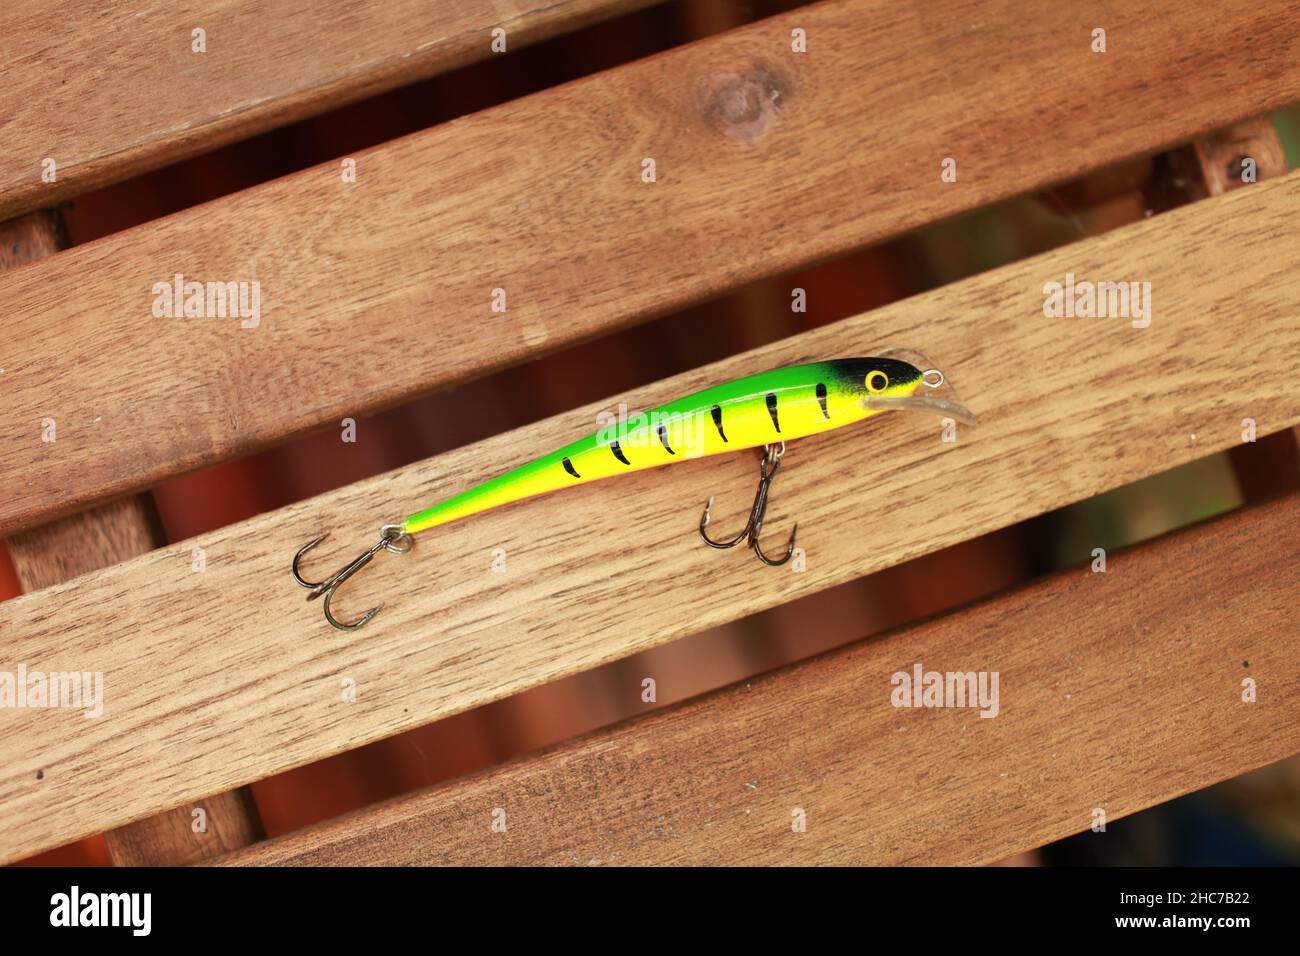 homemade wobbler for fishing large fish on the wooden deck Stock Photo -  Alamy